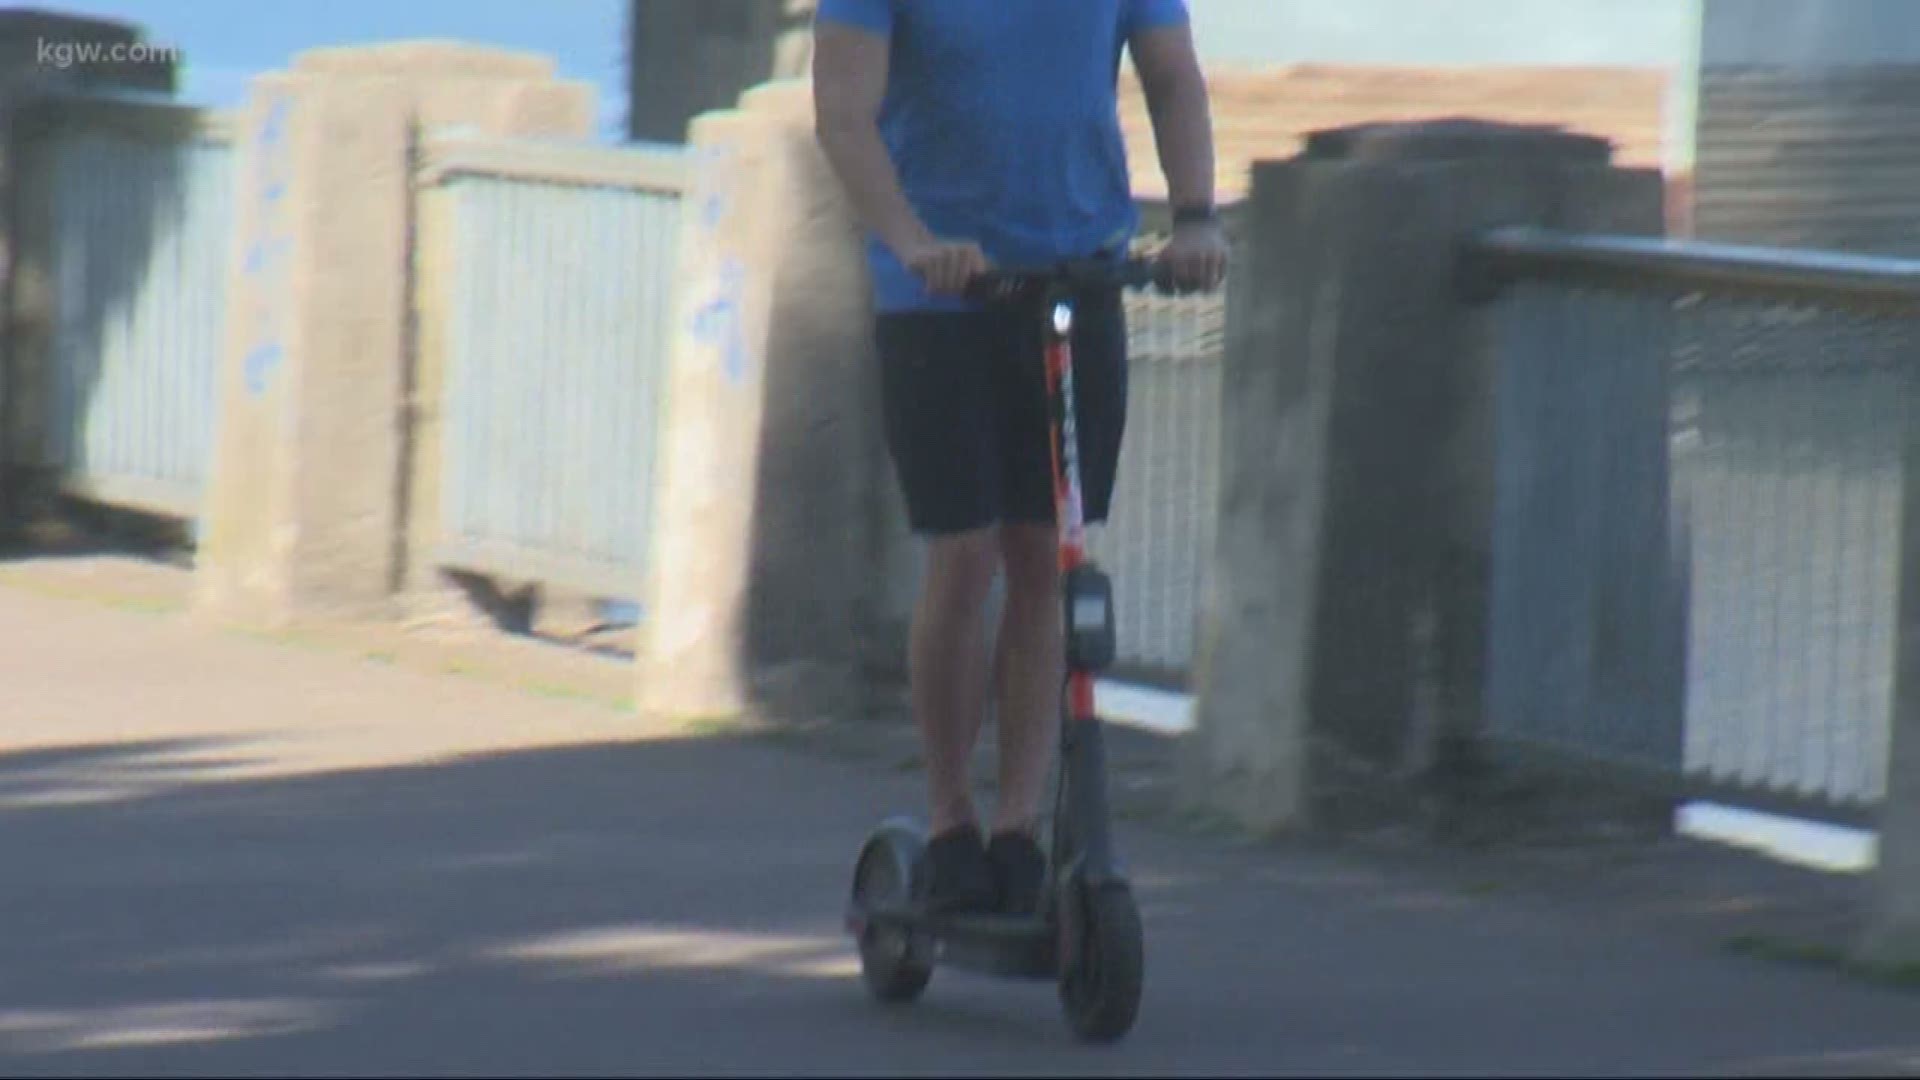 Two e-scooter companies, Bolt and Spin, qualified for an expansion in Portland after meeting criteria for incentives put in place by the Portland Bureau of Transportation.